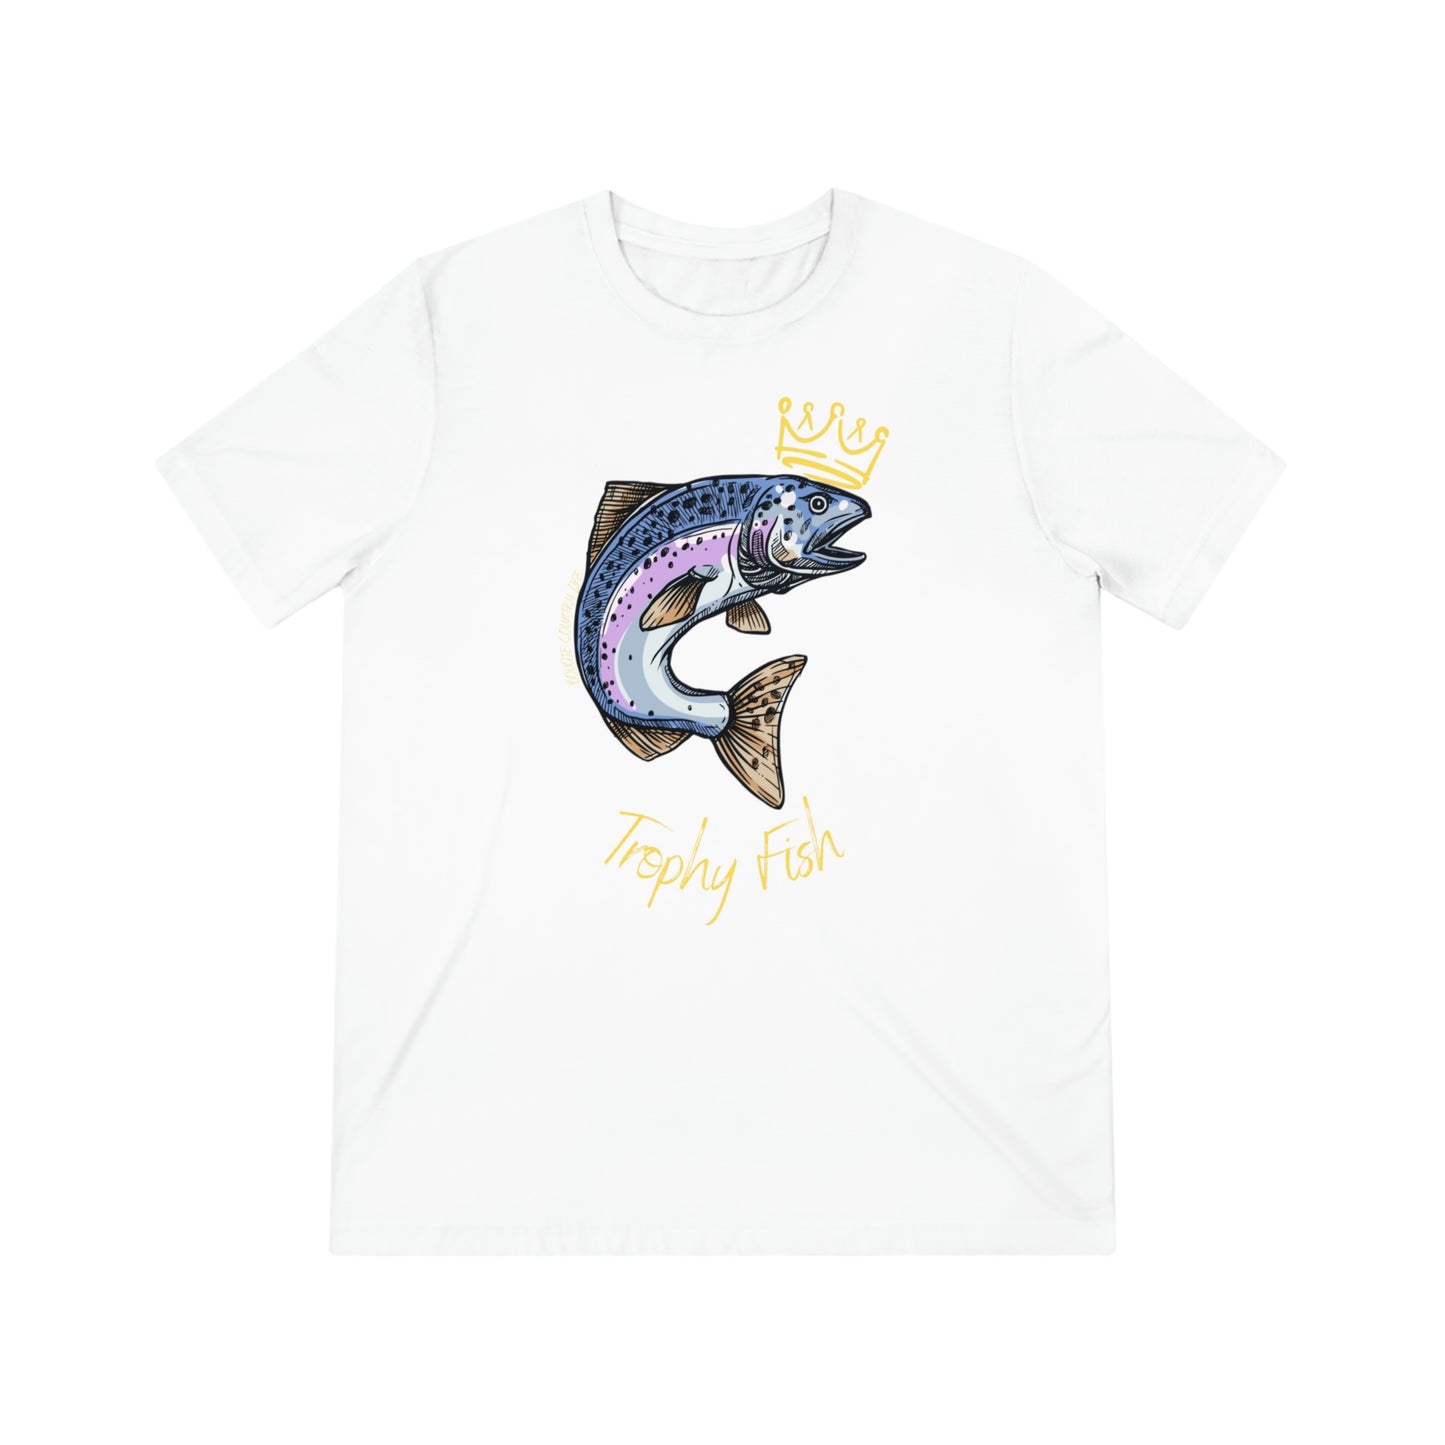 Trophy Fish Triblend Tee